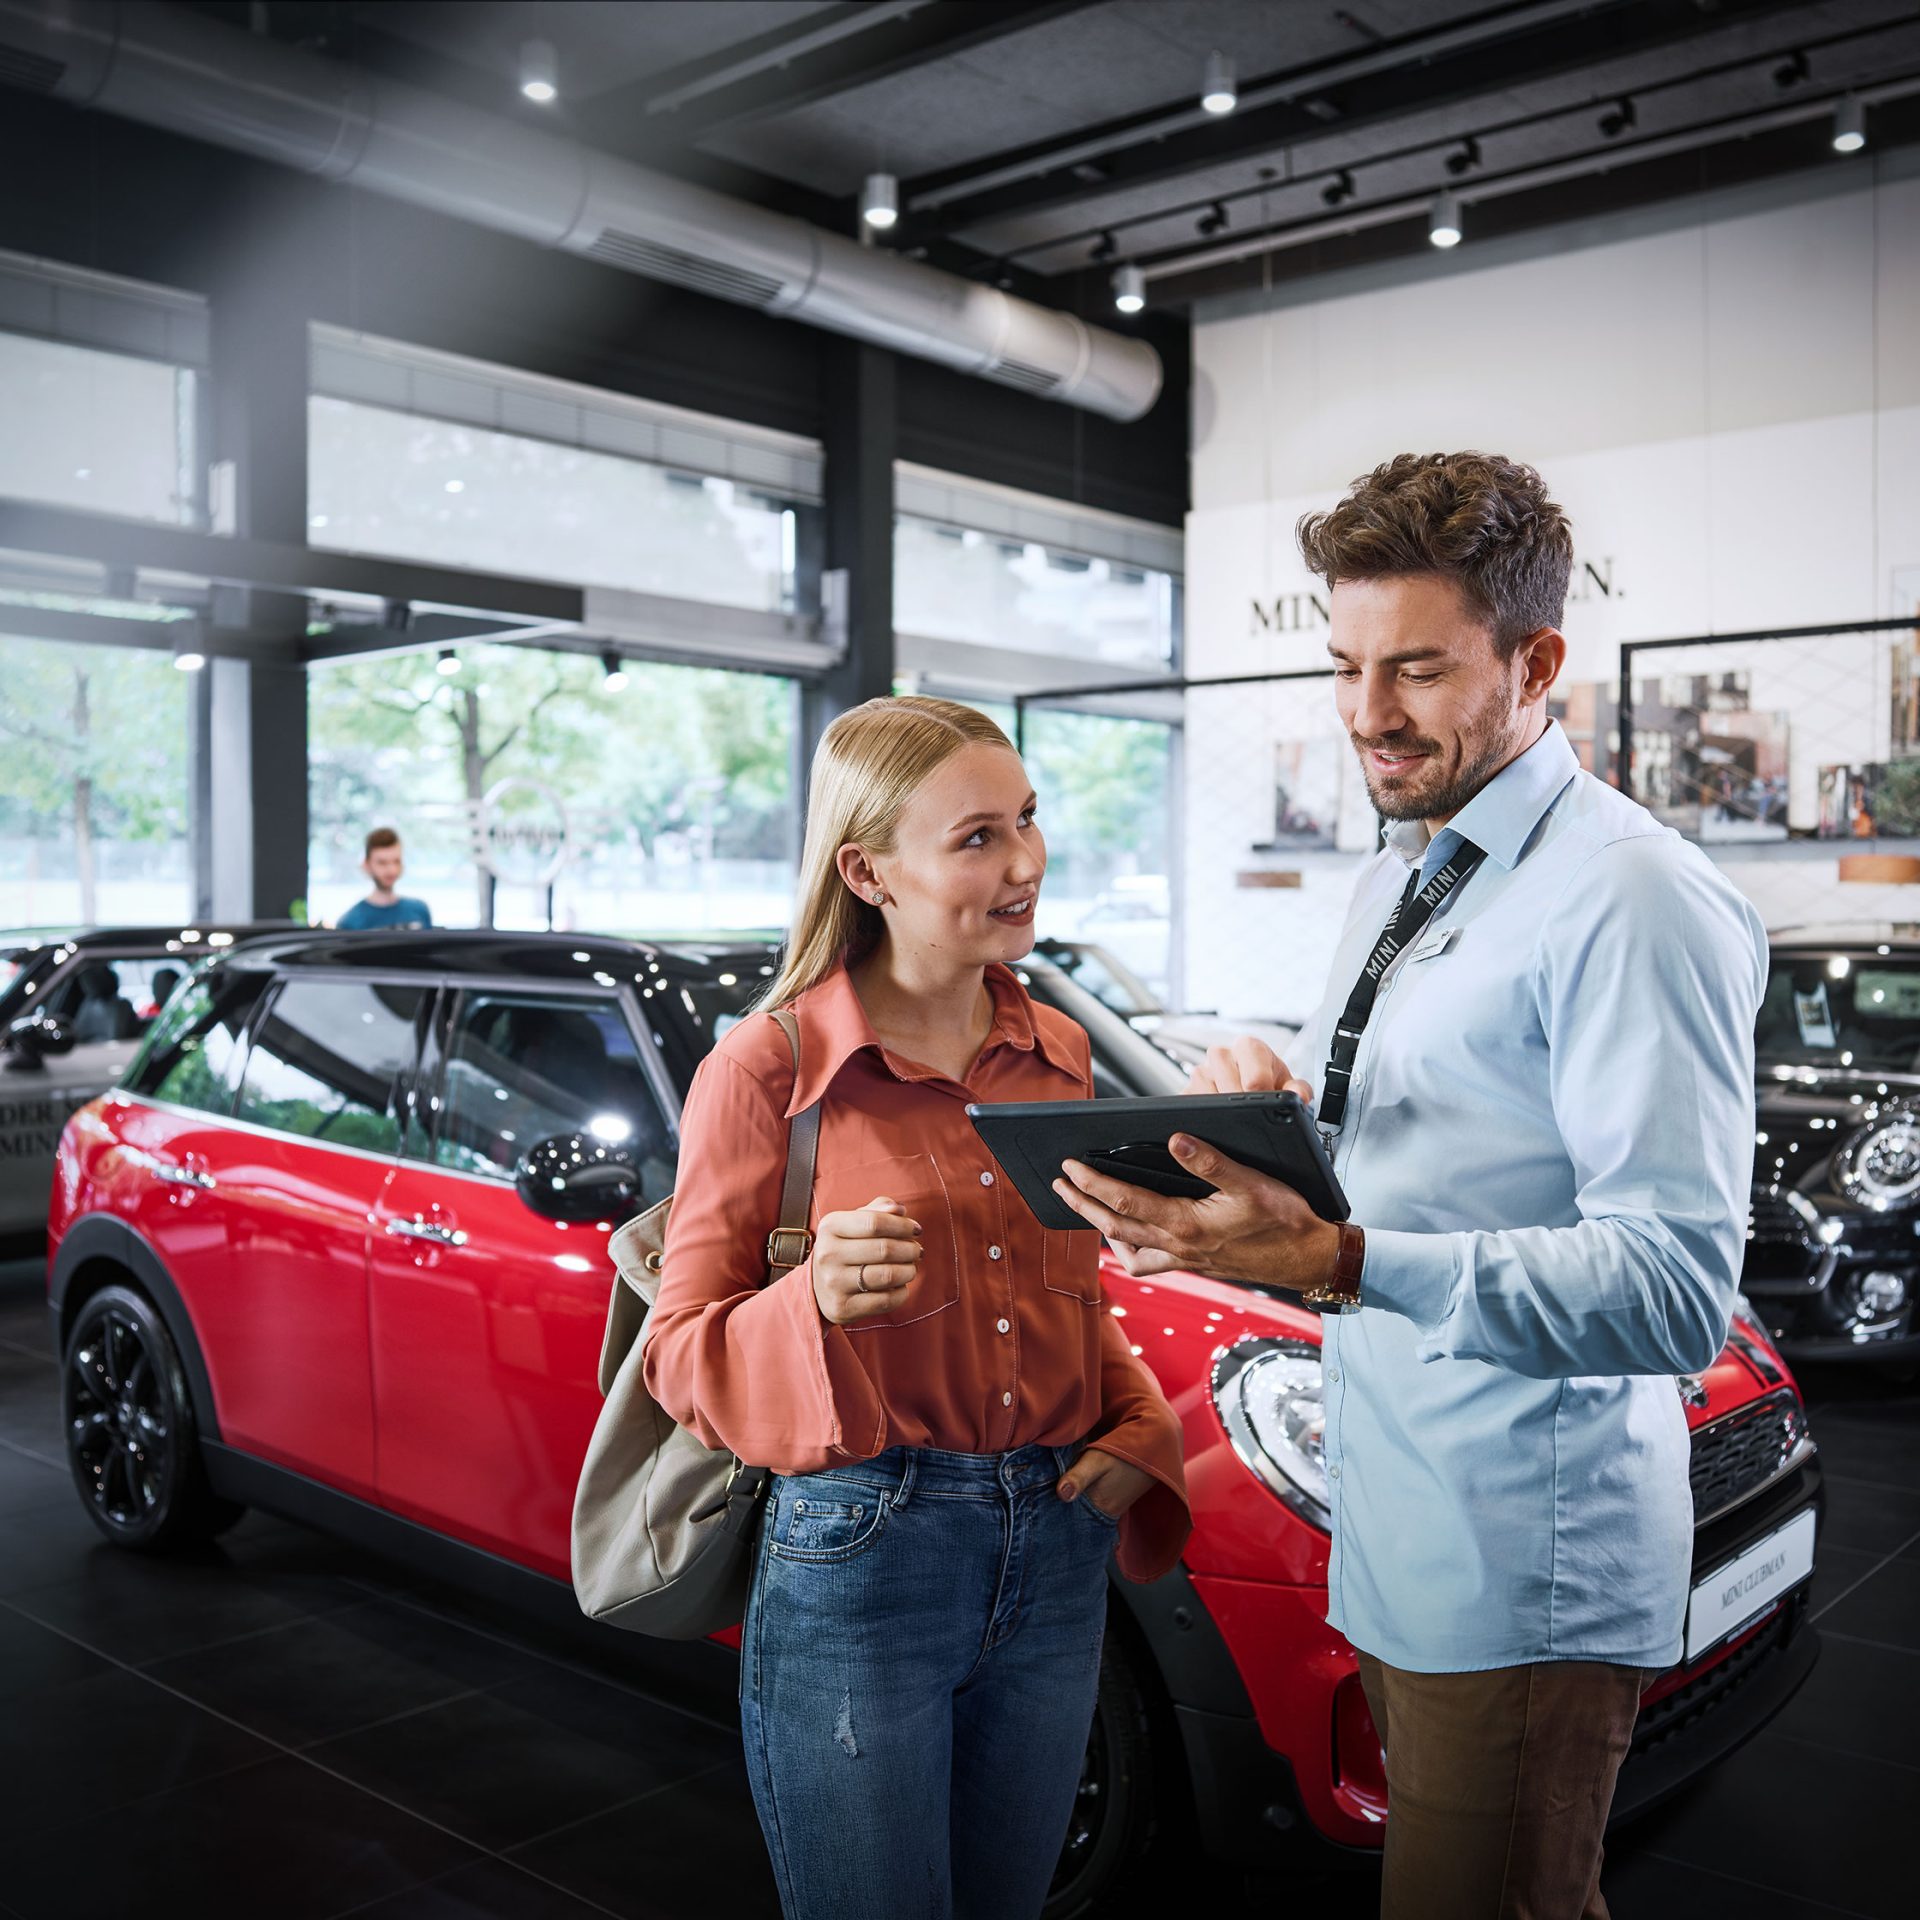 The image shows a sales situation in a MINI dealership.